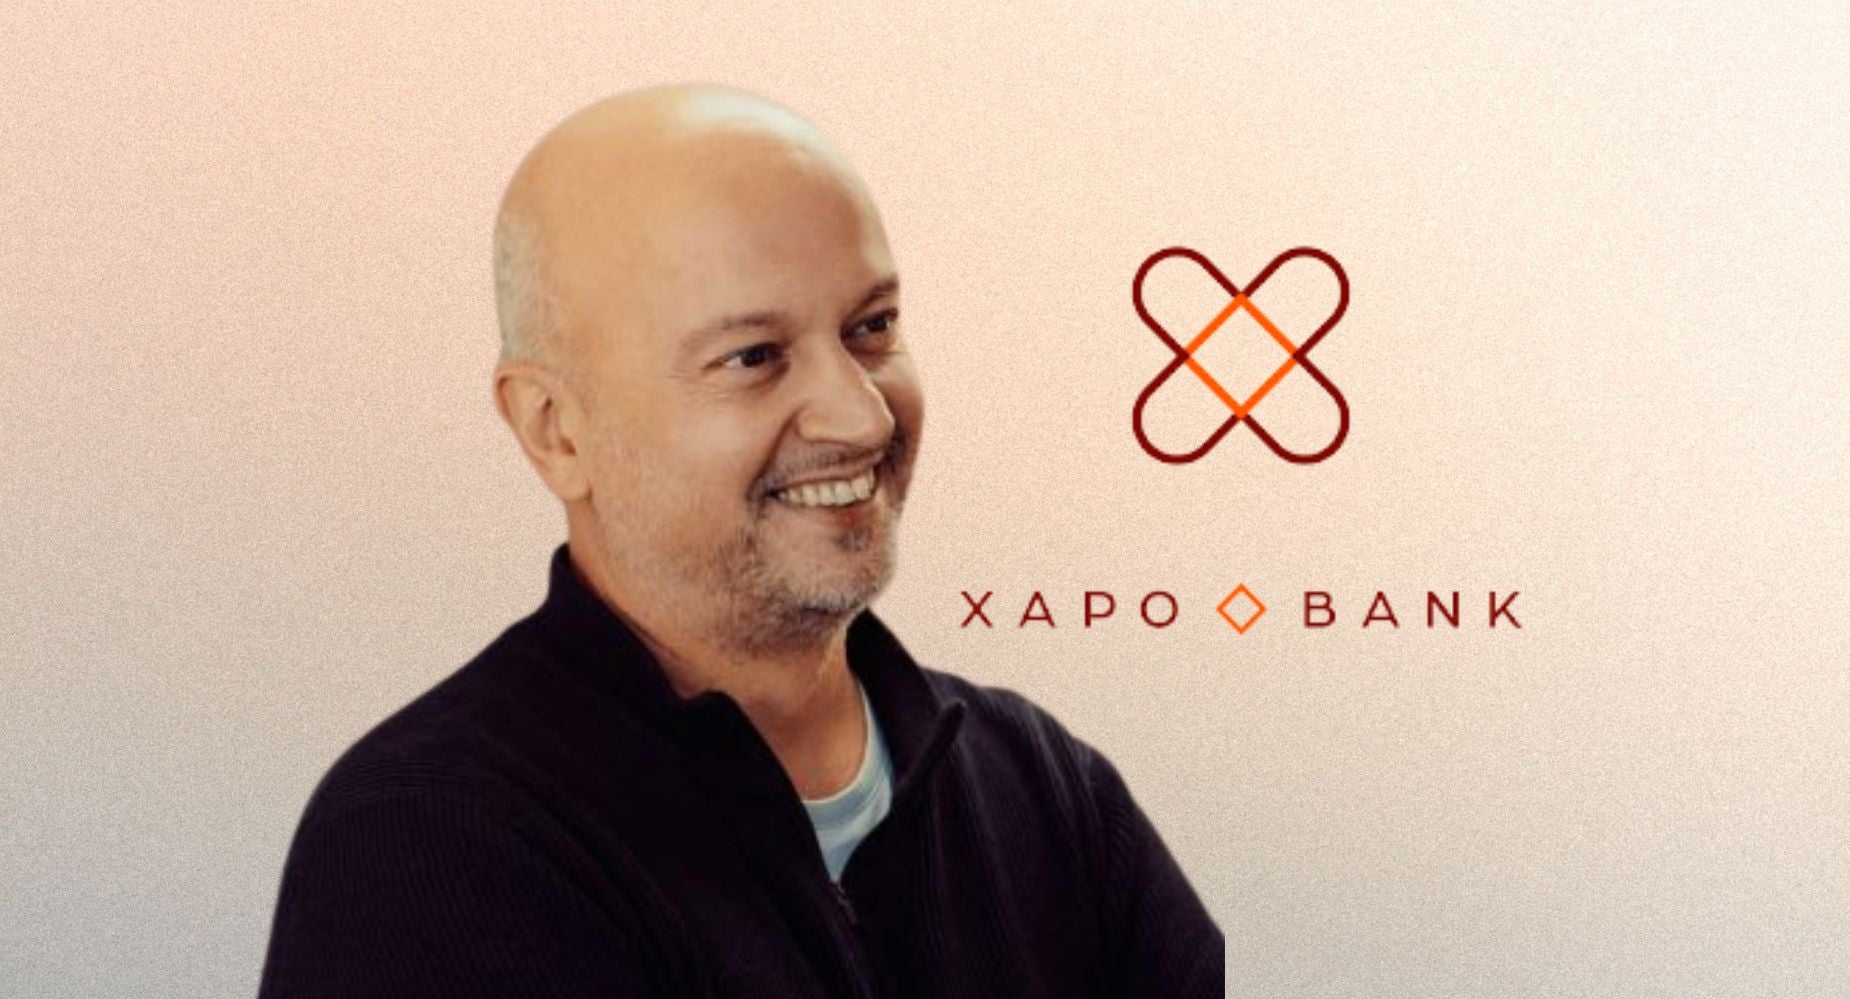 Xapo Bank, the SoftBank backed crypto bank is focusing its